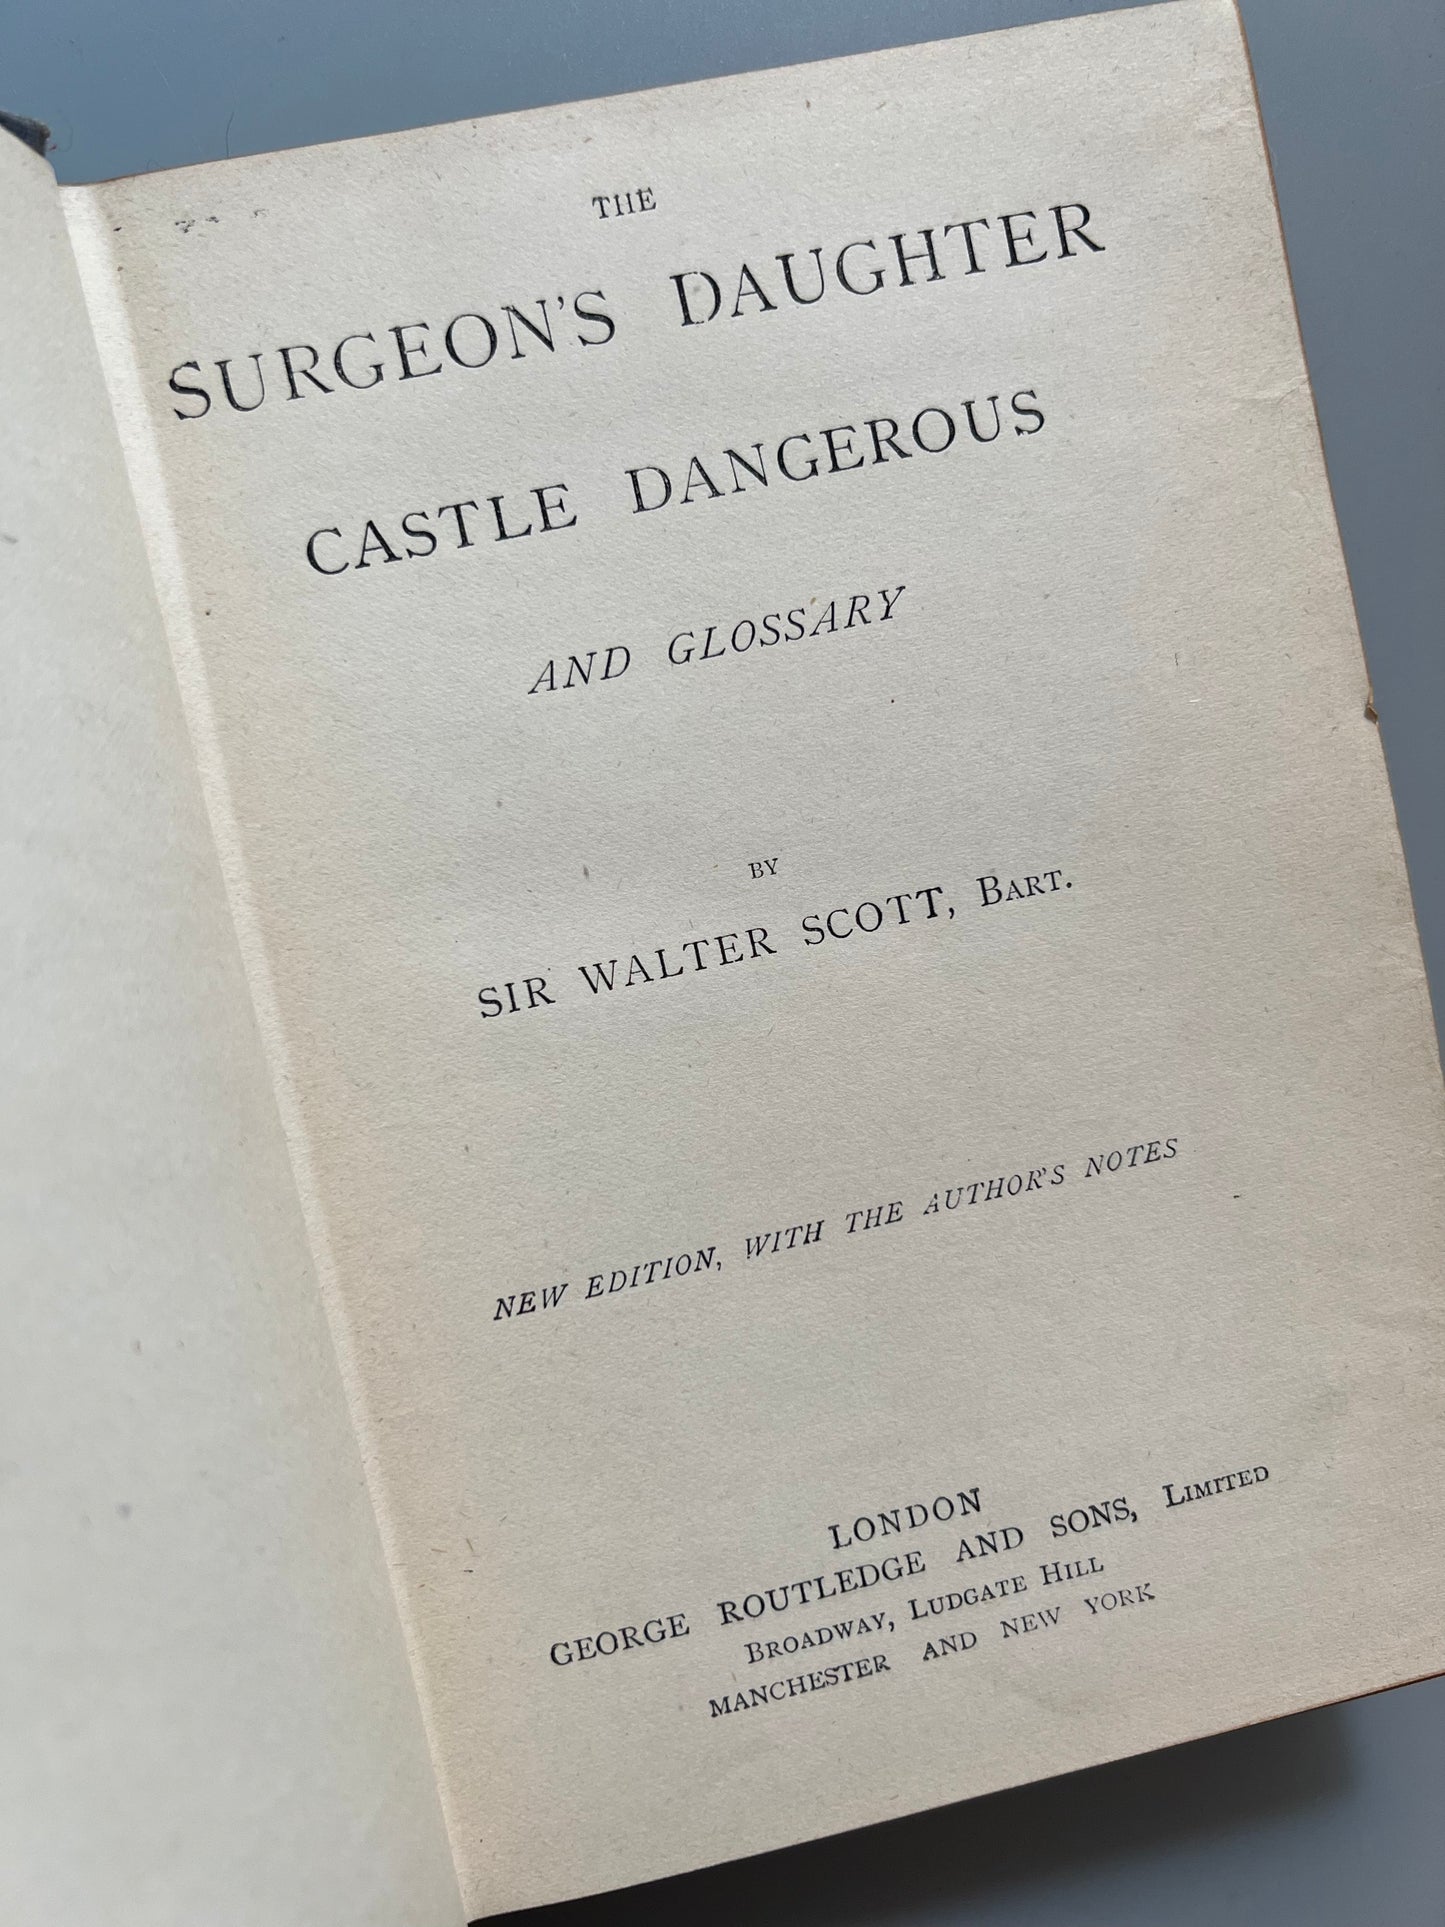 The surgeon's daughter y Castle dangerous, Walter Scott - George Routledge and Sons, ca. 1890